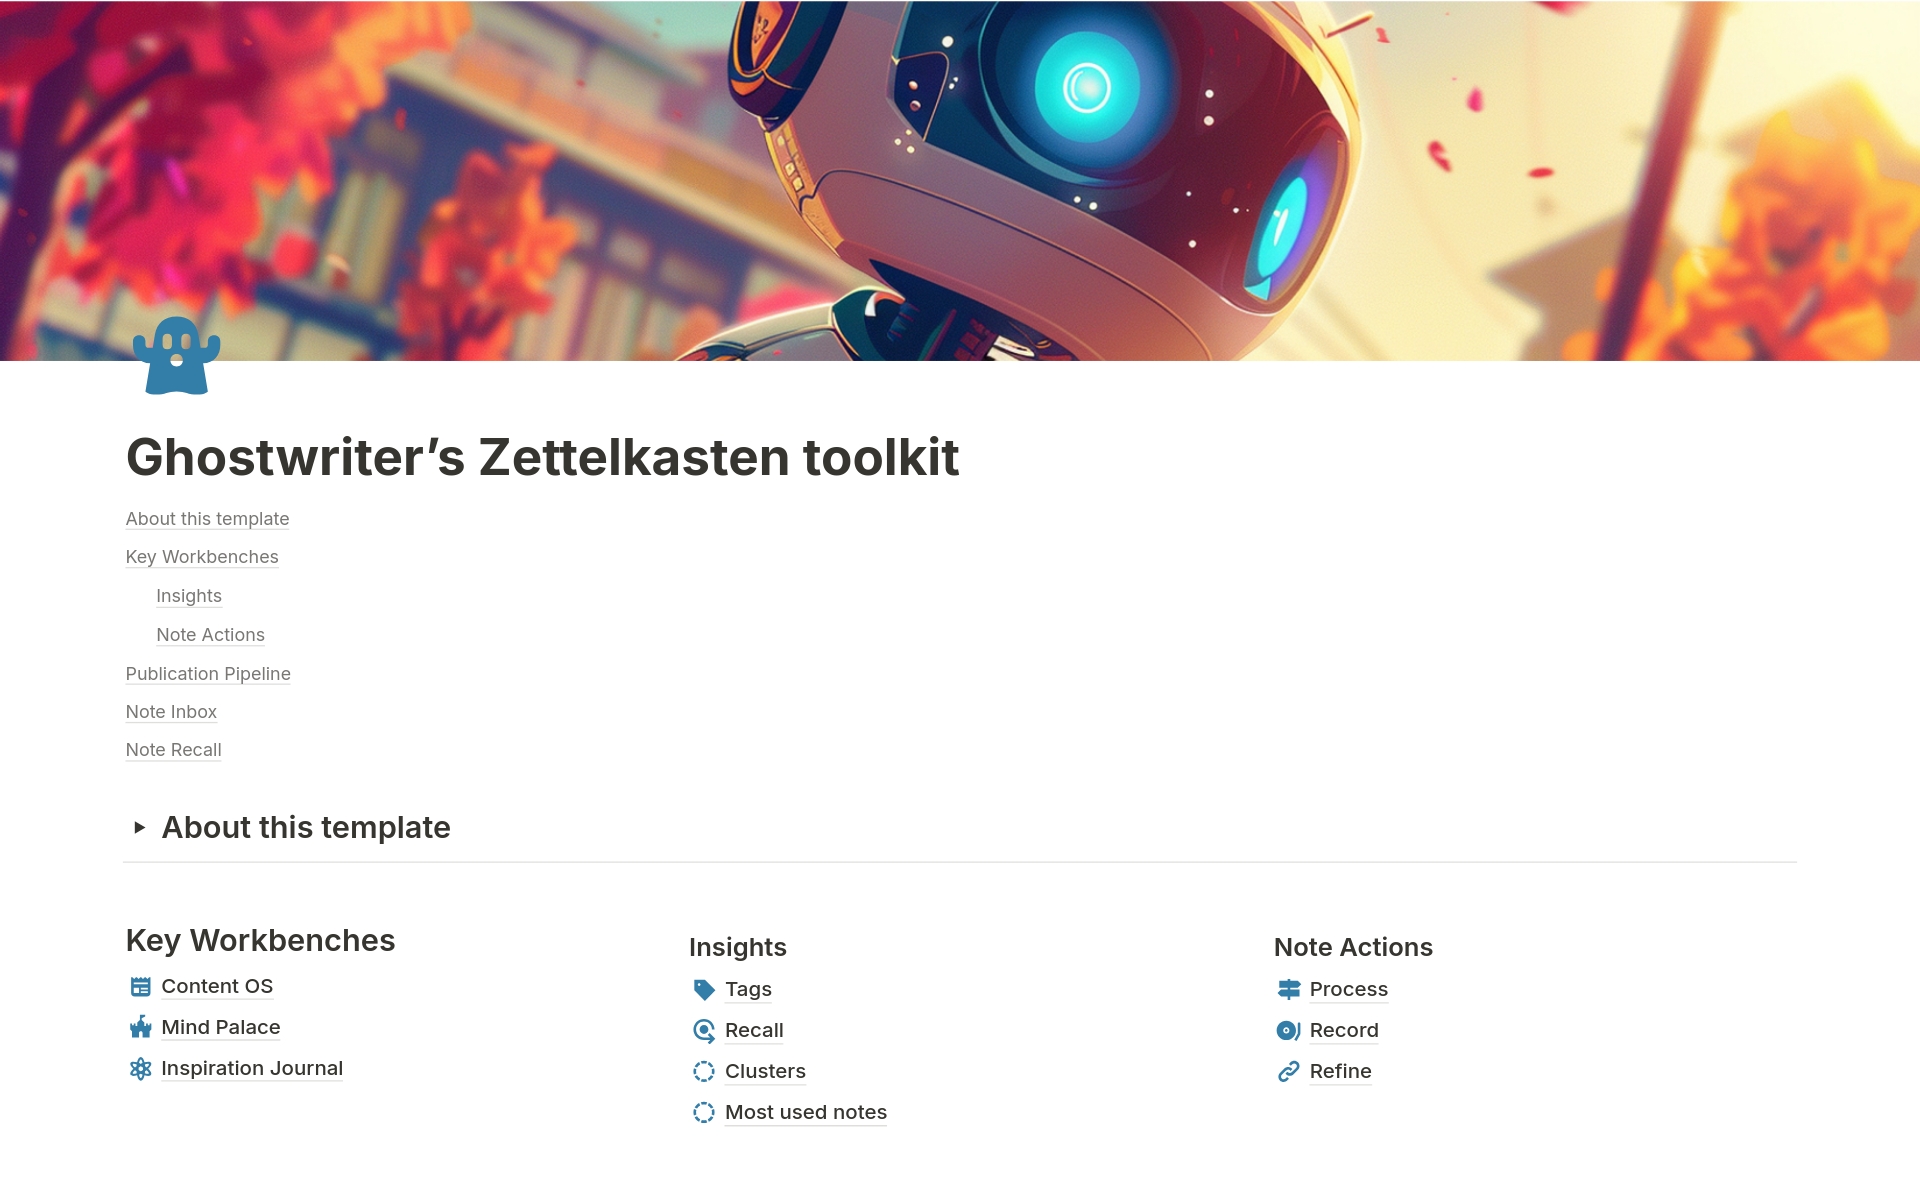 The "Ghostwriter's Zettelkasten Toolkit" is a comprehensive Notion template that is revolutionising how content creators, writers, and knowledge enthusiasts manage their workflows and ideas using the Zettelkasten method.